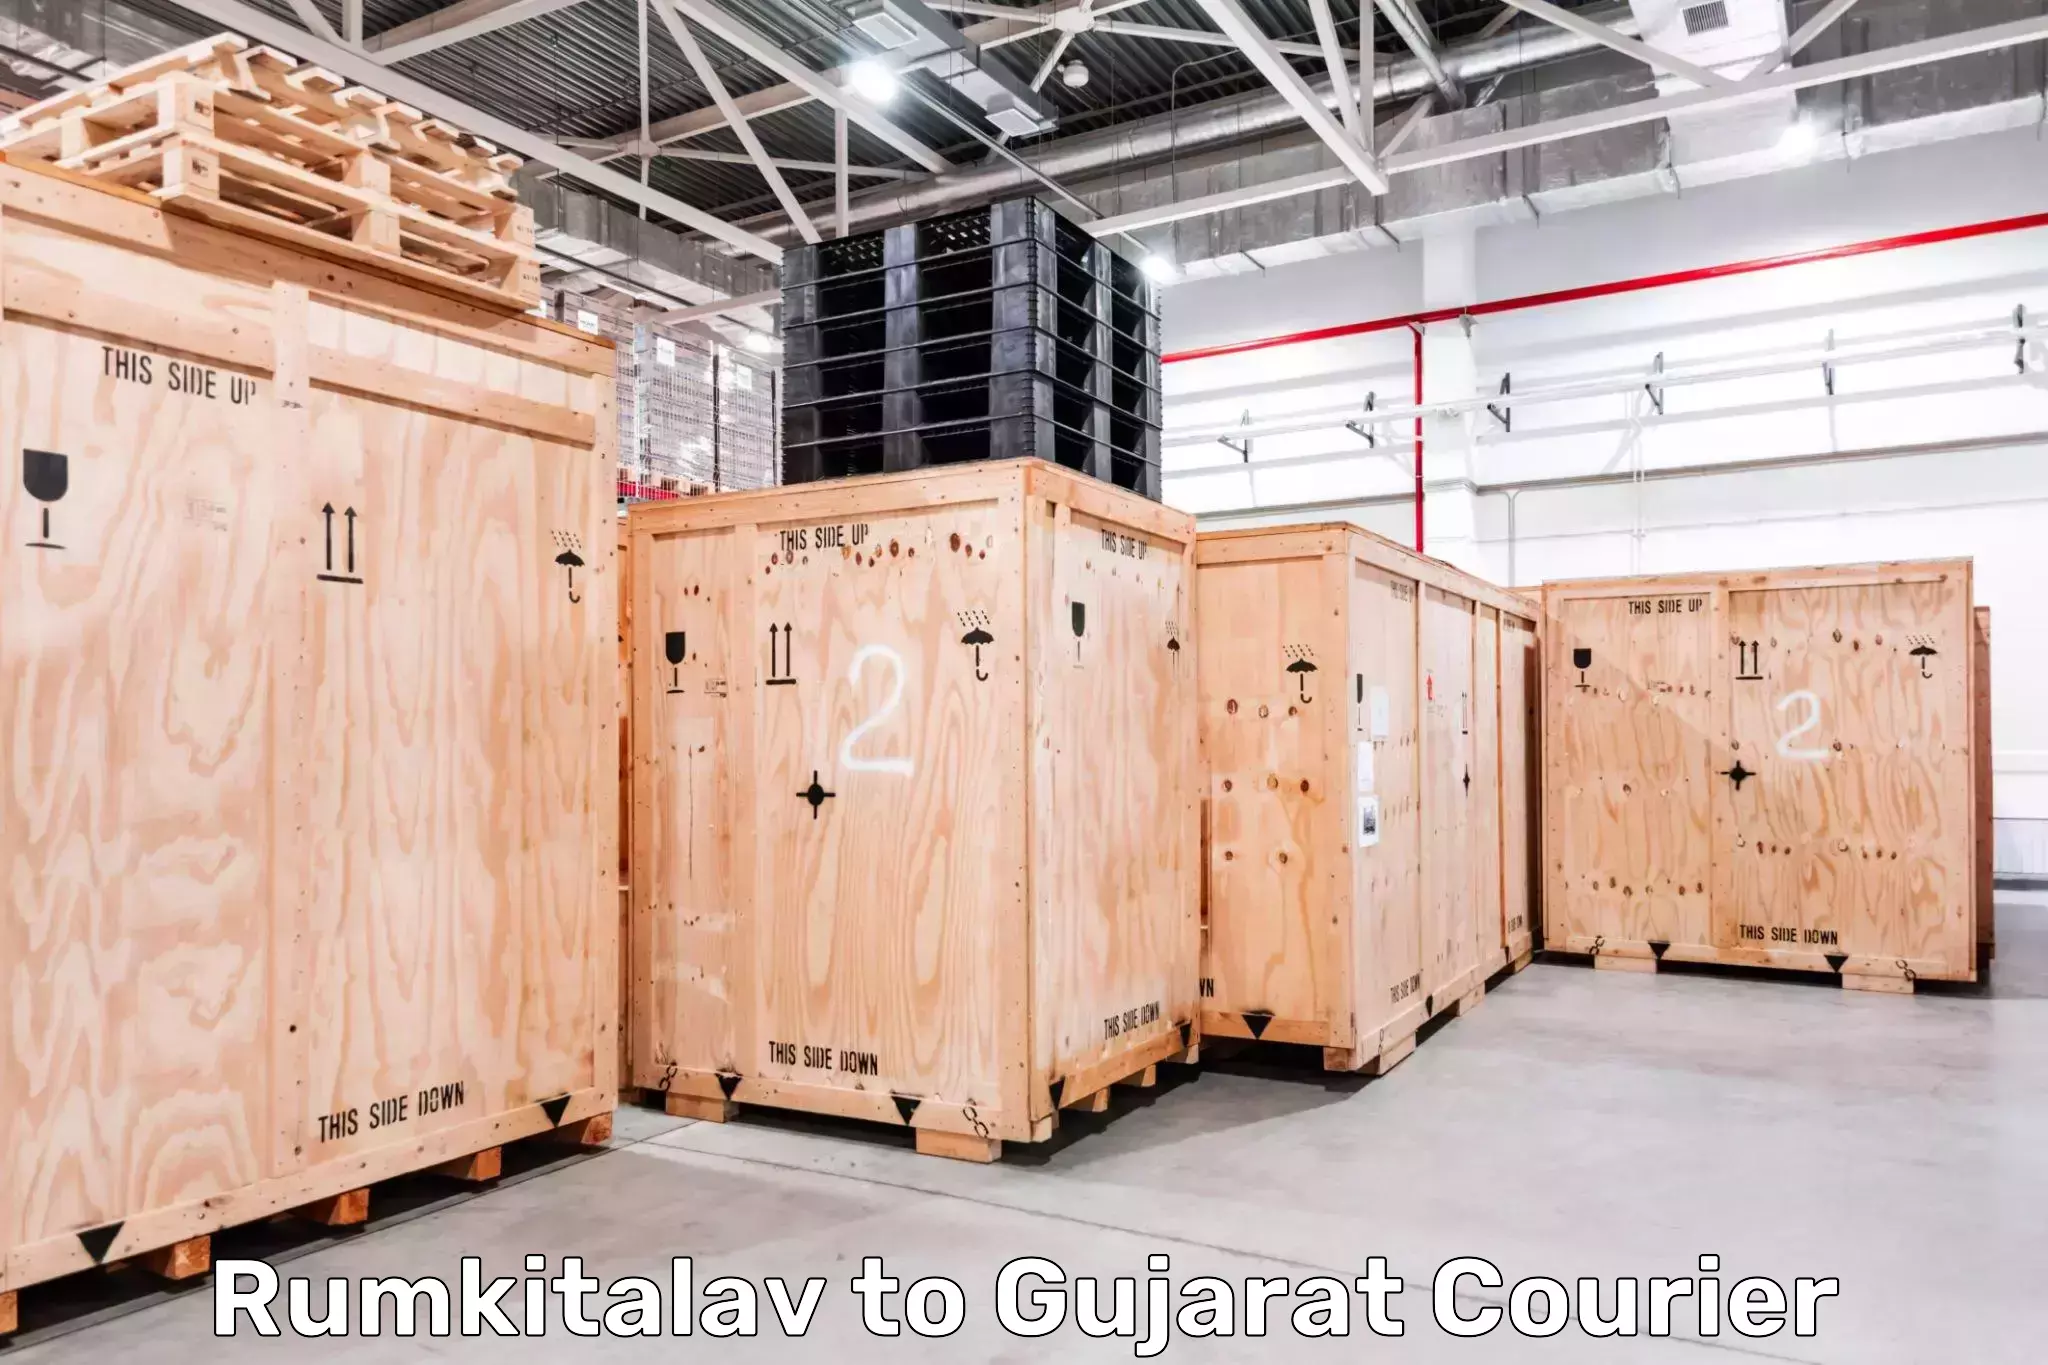 Multi-national courier services Rumkitalav to Vansda